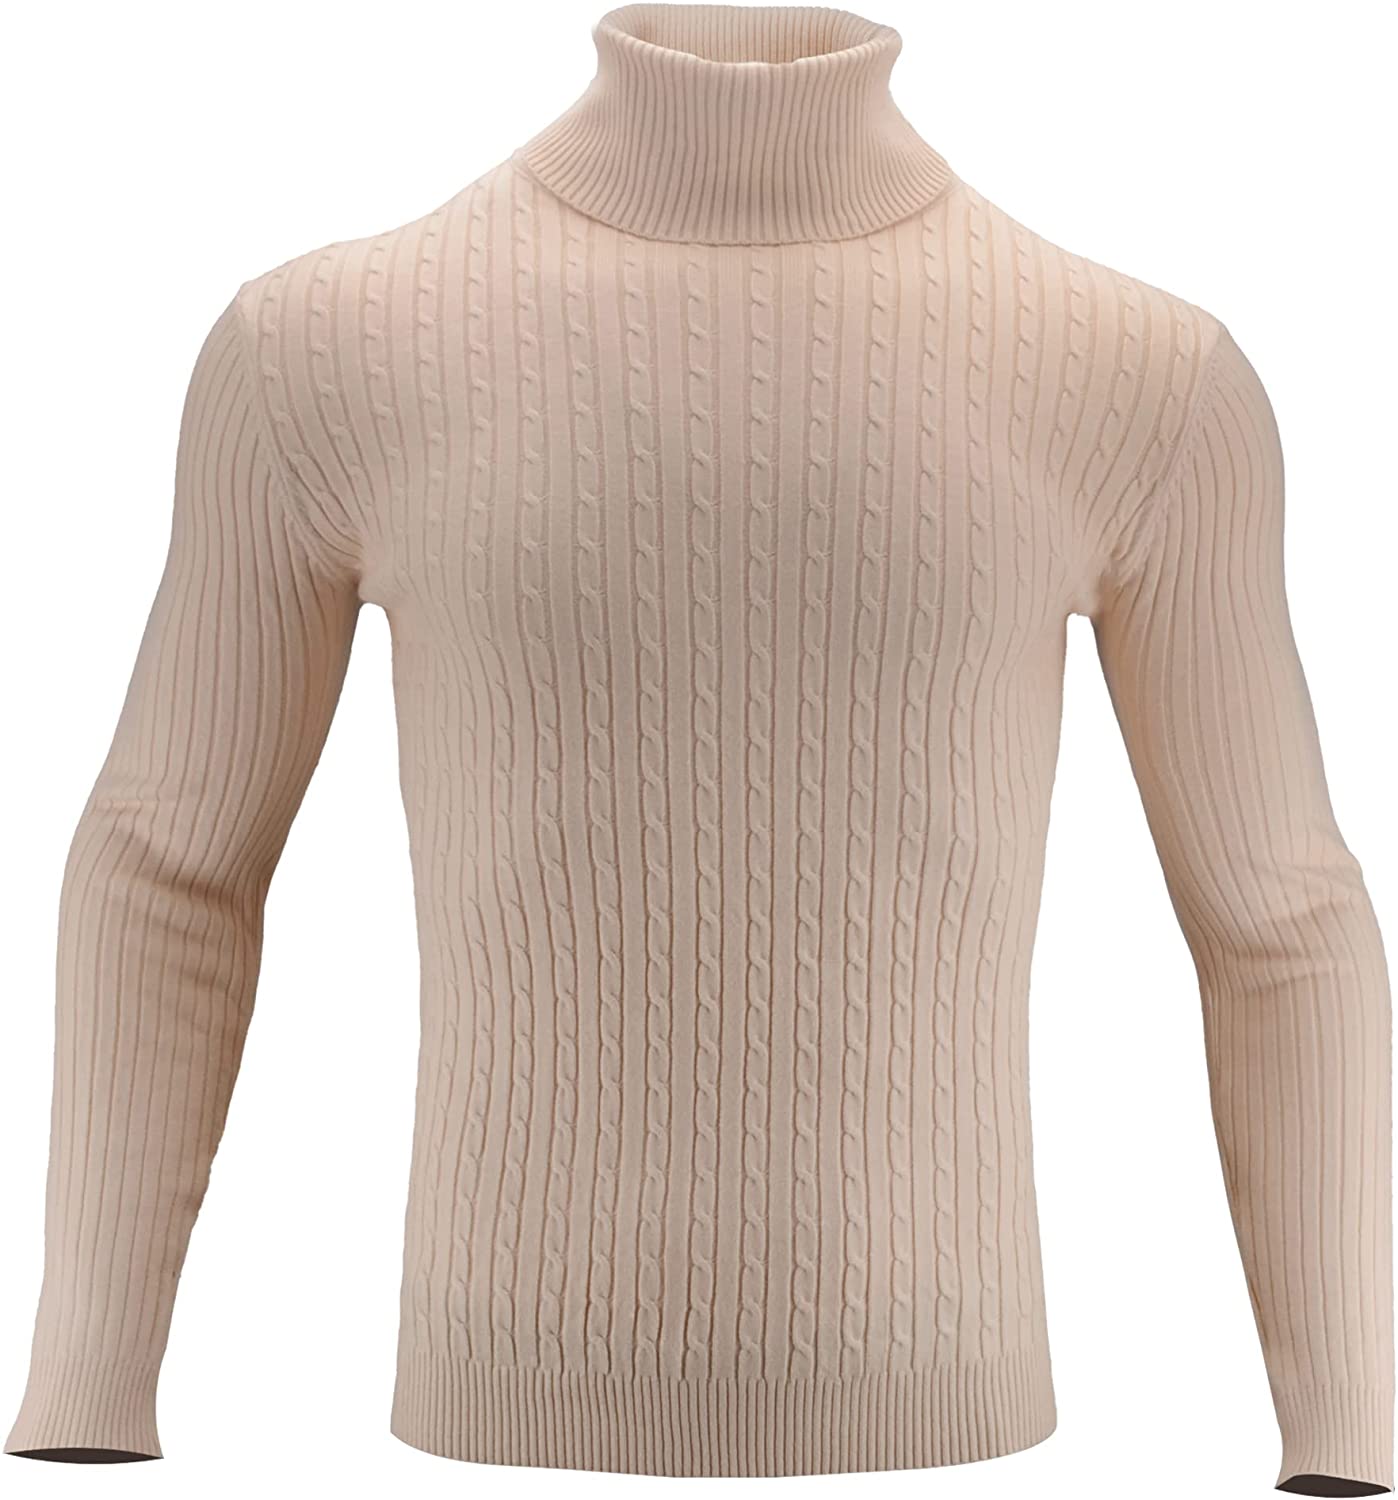 nine bull Mens Slim Fit Turtleneck Sweater Cable Knit Thermal Pullover Sweater